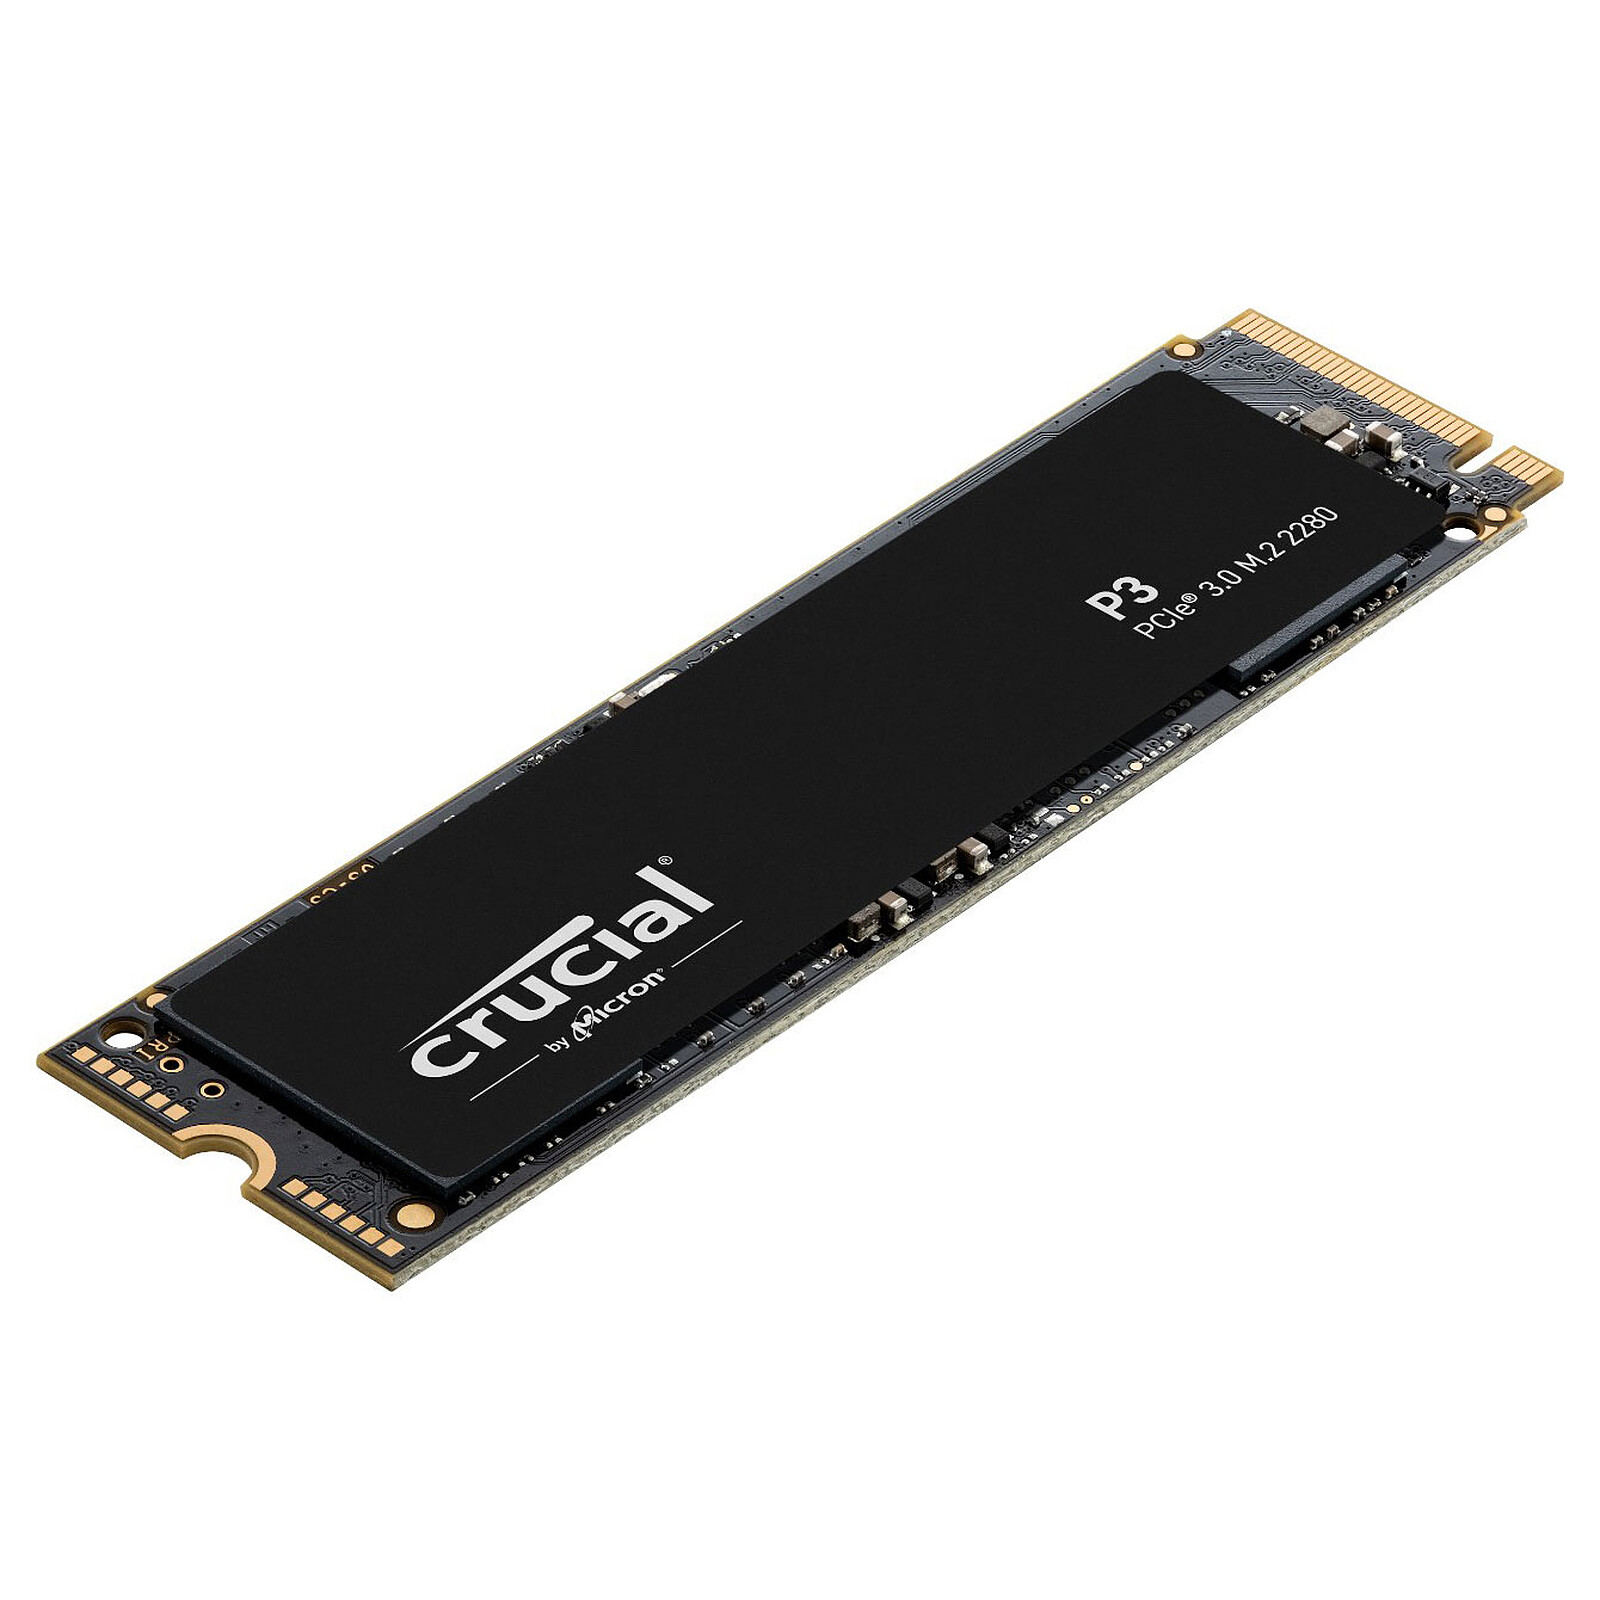 Crucial P3 1 To - Disque SSD - LDLC